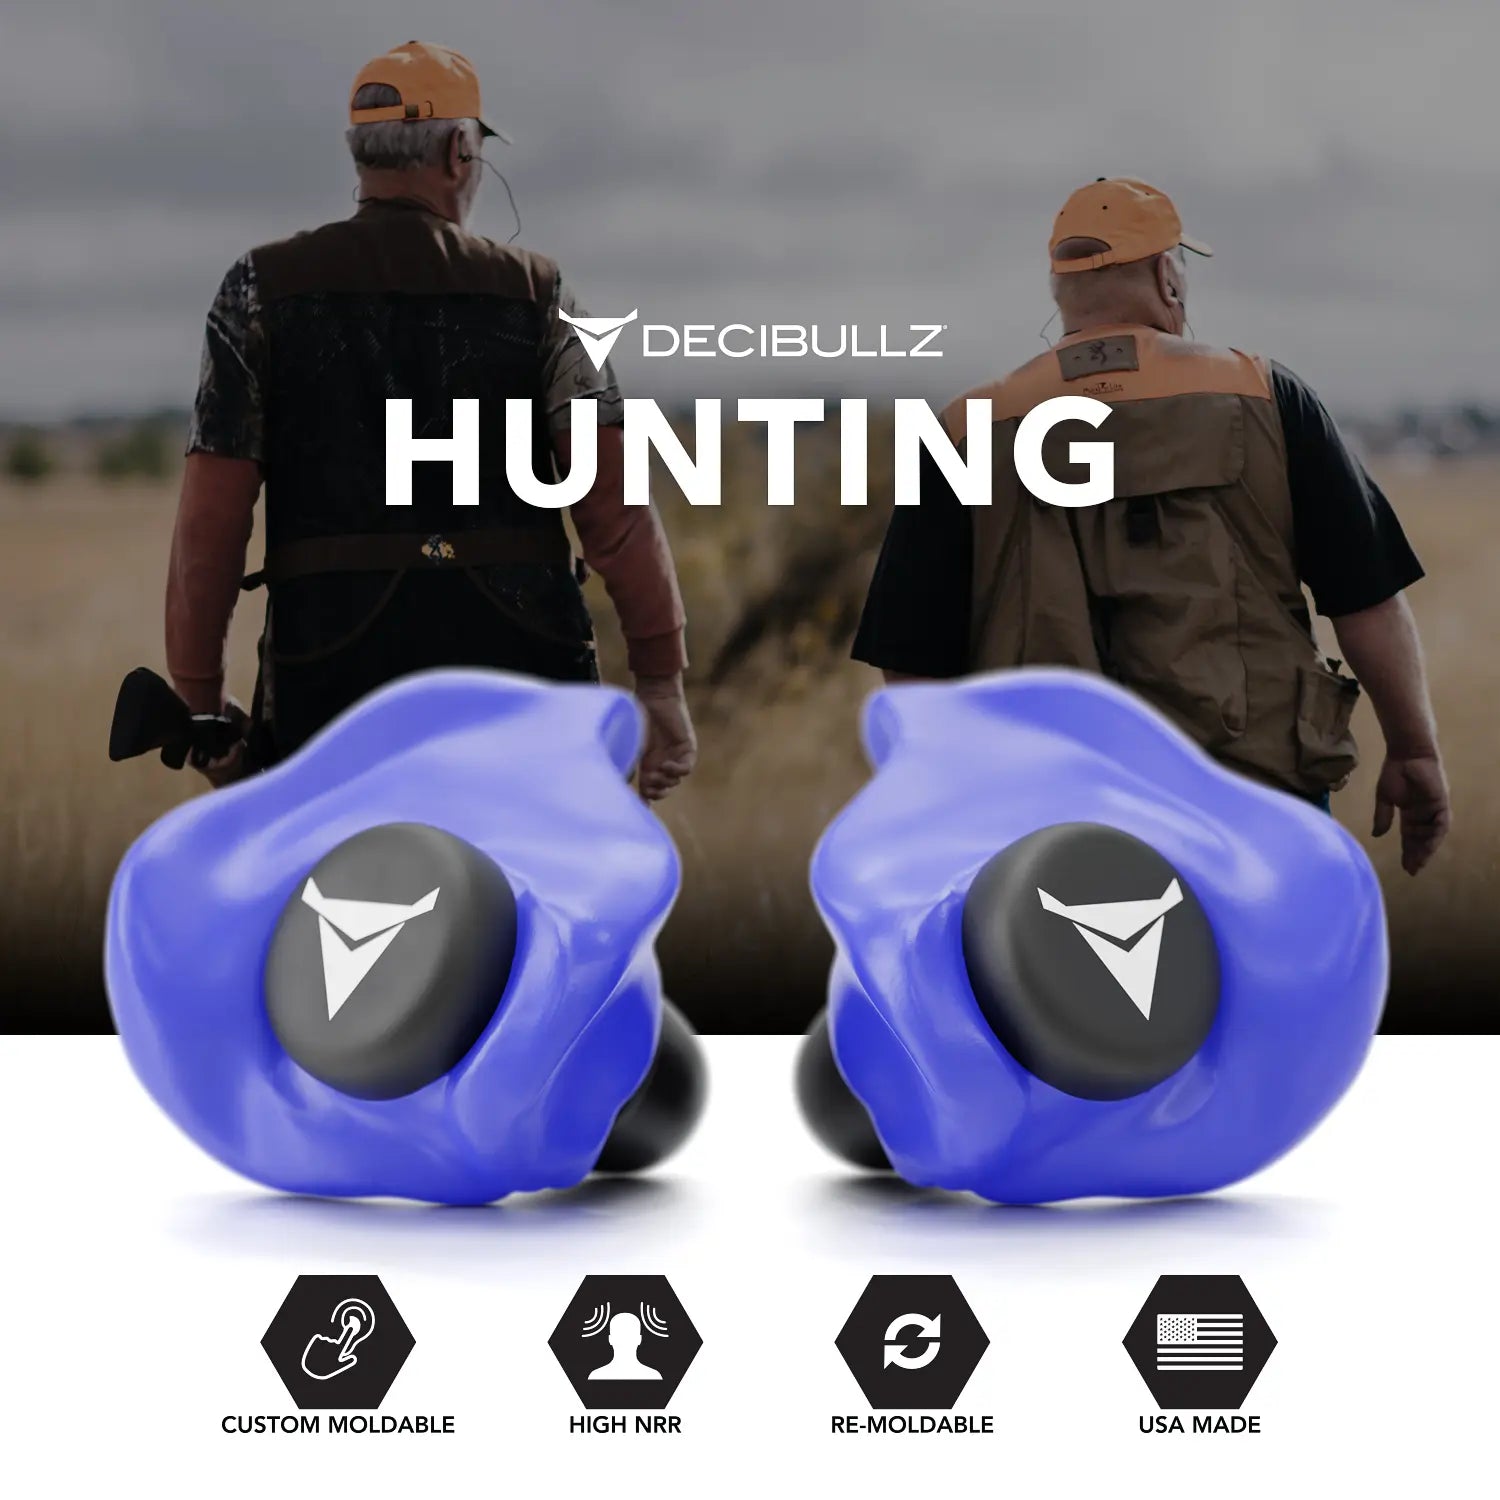 Decibullz - Custom Molded Earplugs, 31dB Highest NRR, Comfortable Hearing  Protection for Shooting, Travel, Swimming, Work and Concerts (Orange)